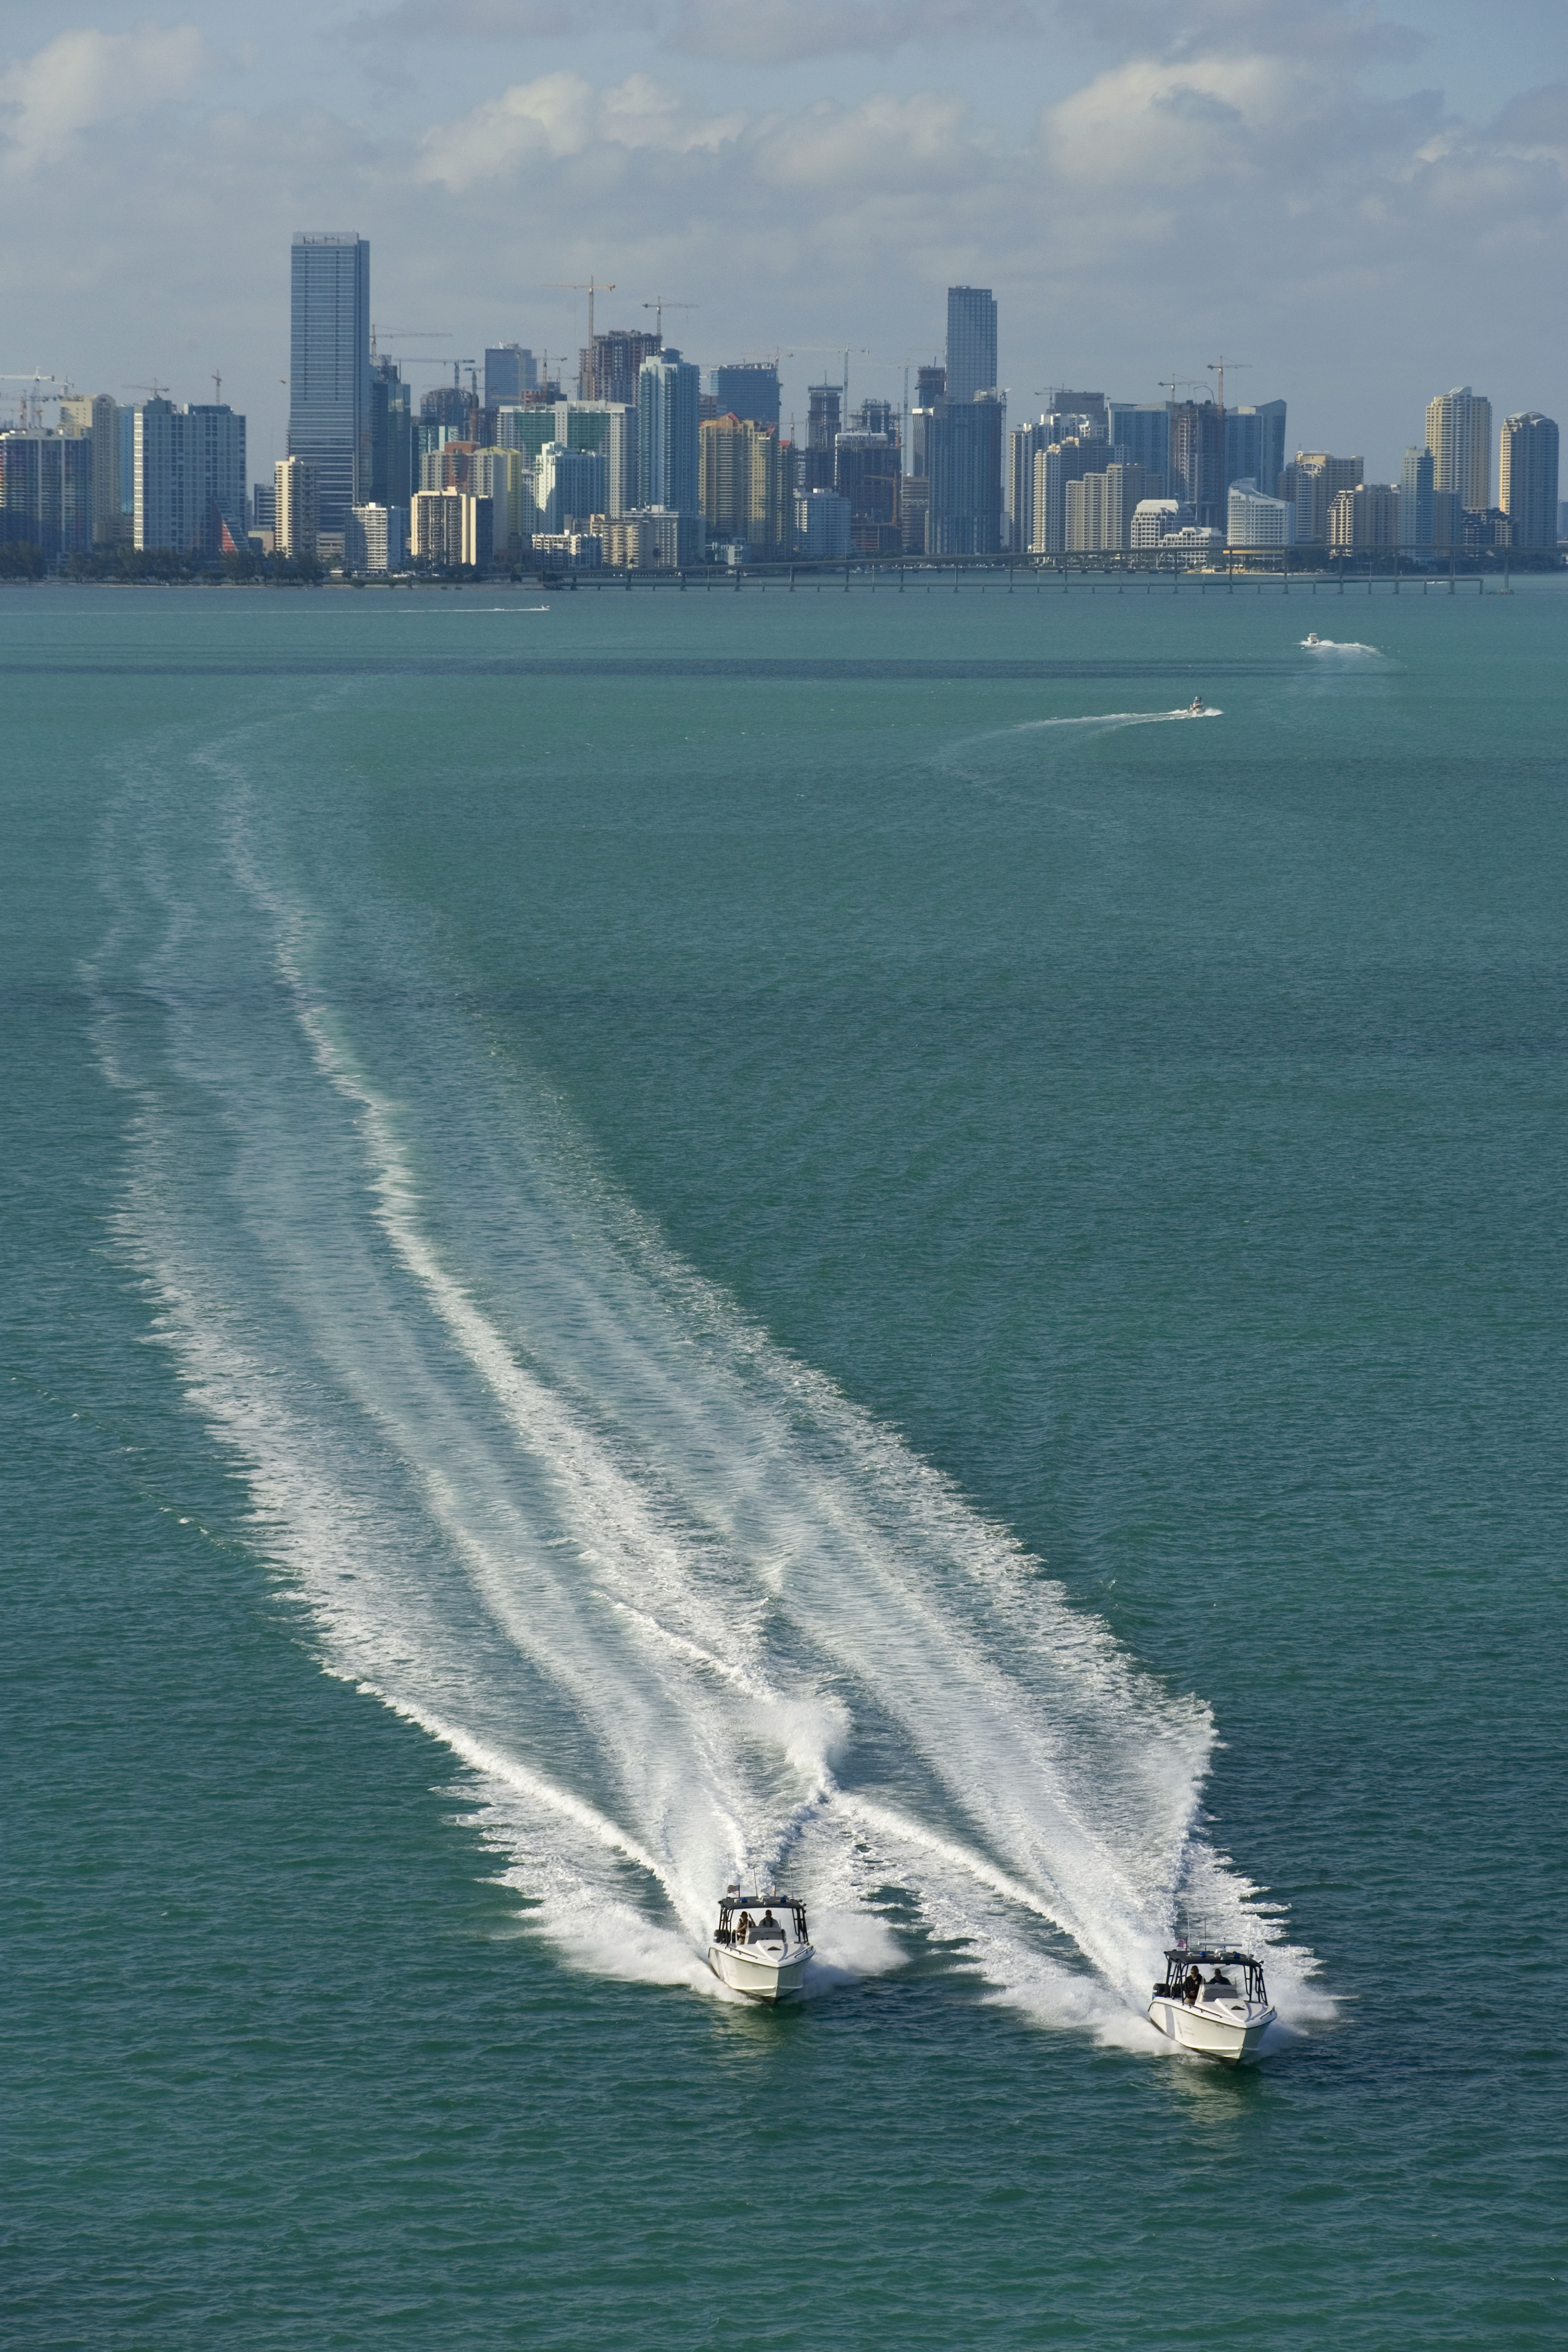 Two CBP marine unit Midnight Express boats patrol the waters off Miami.